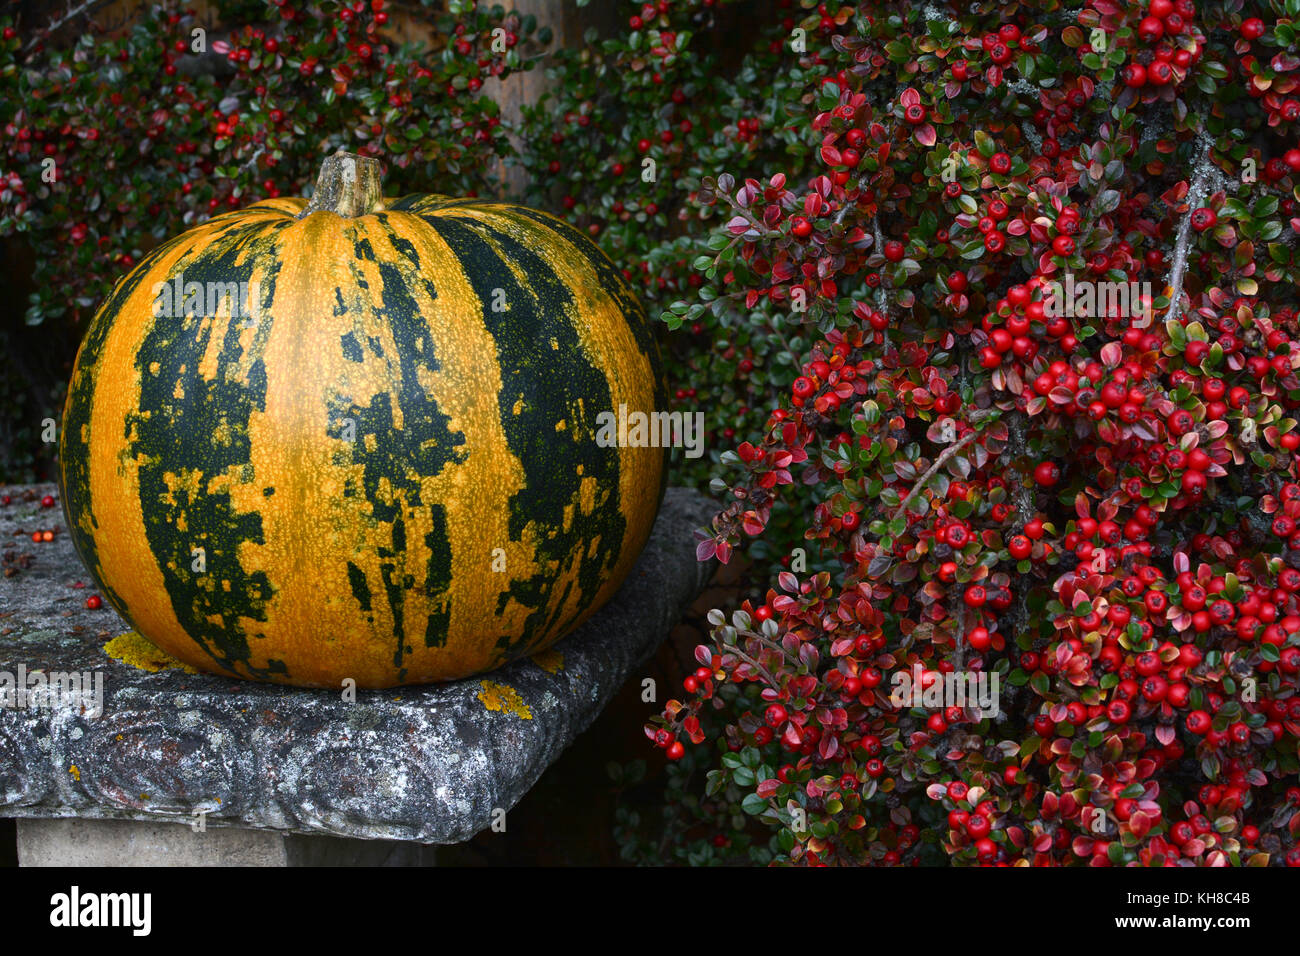 Green and orange striped pumpkin on stone bench next to bright red cotoneaster berries in autumn Stock Photo